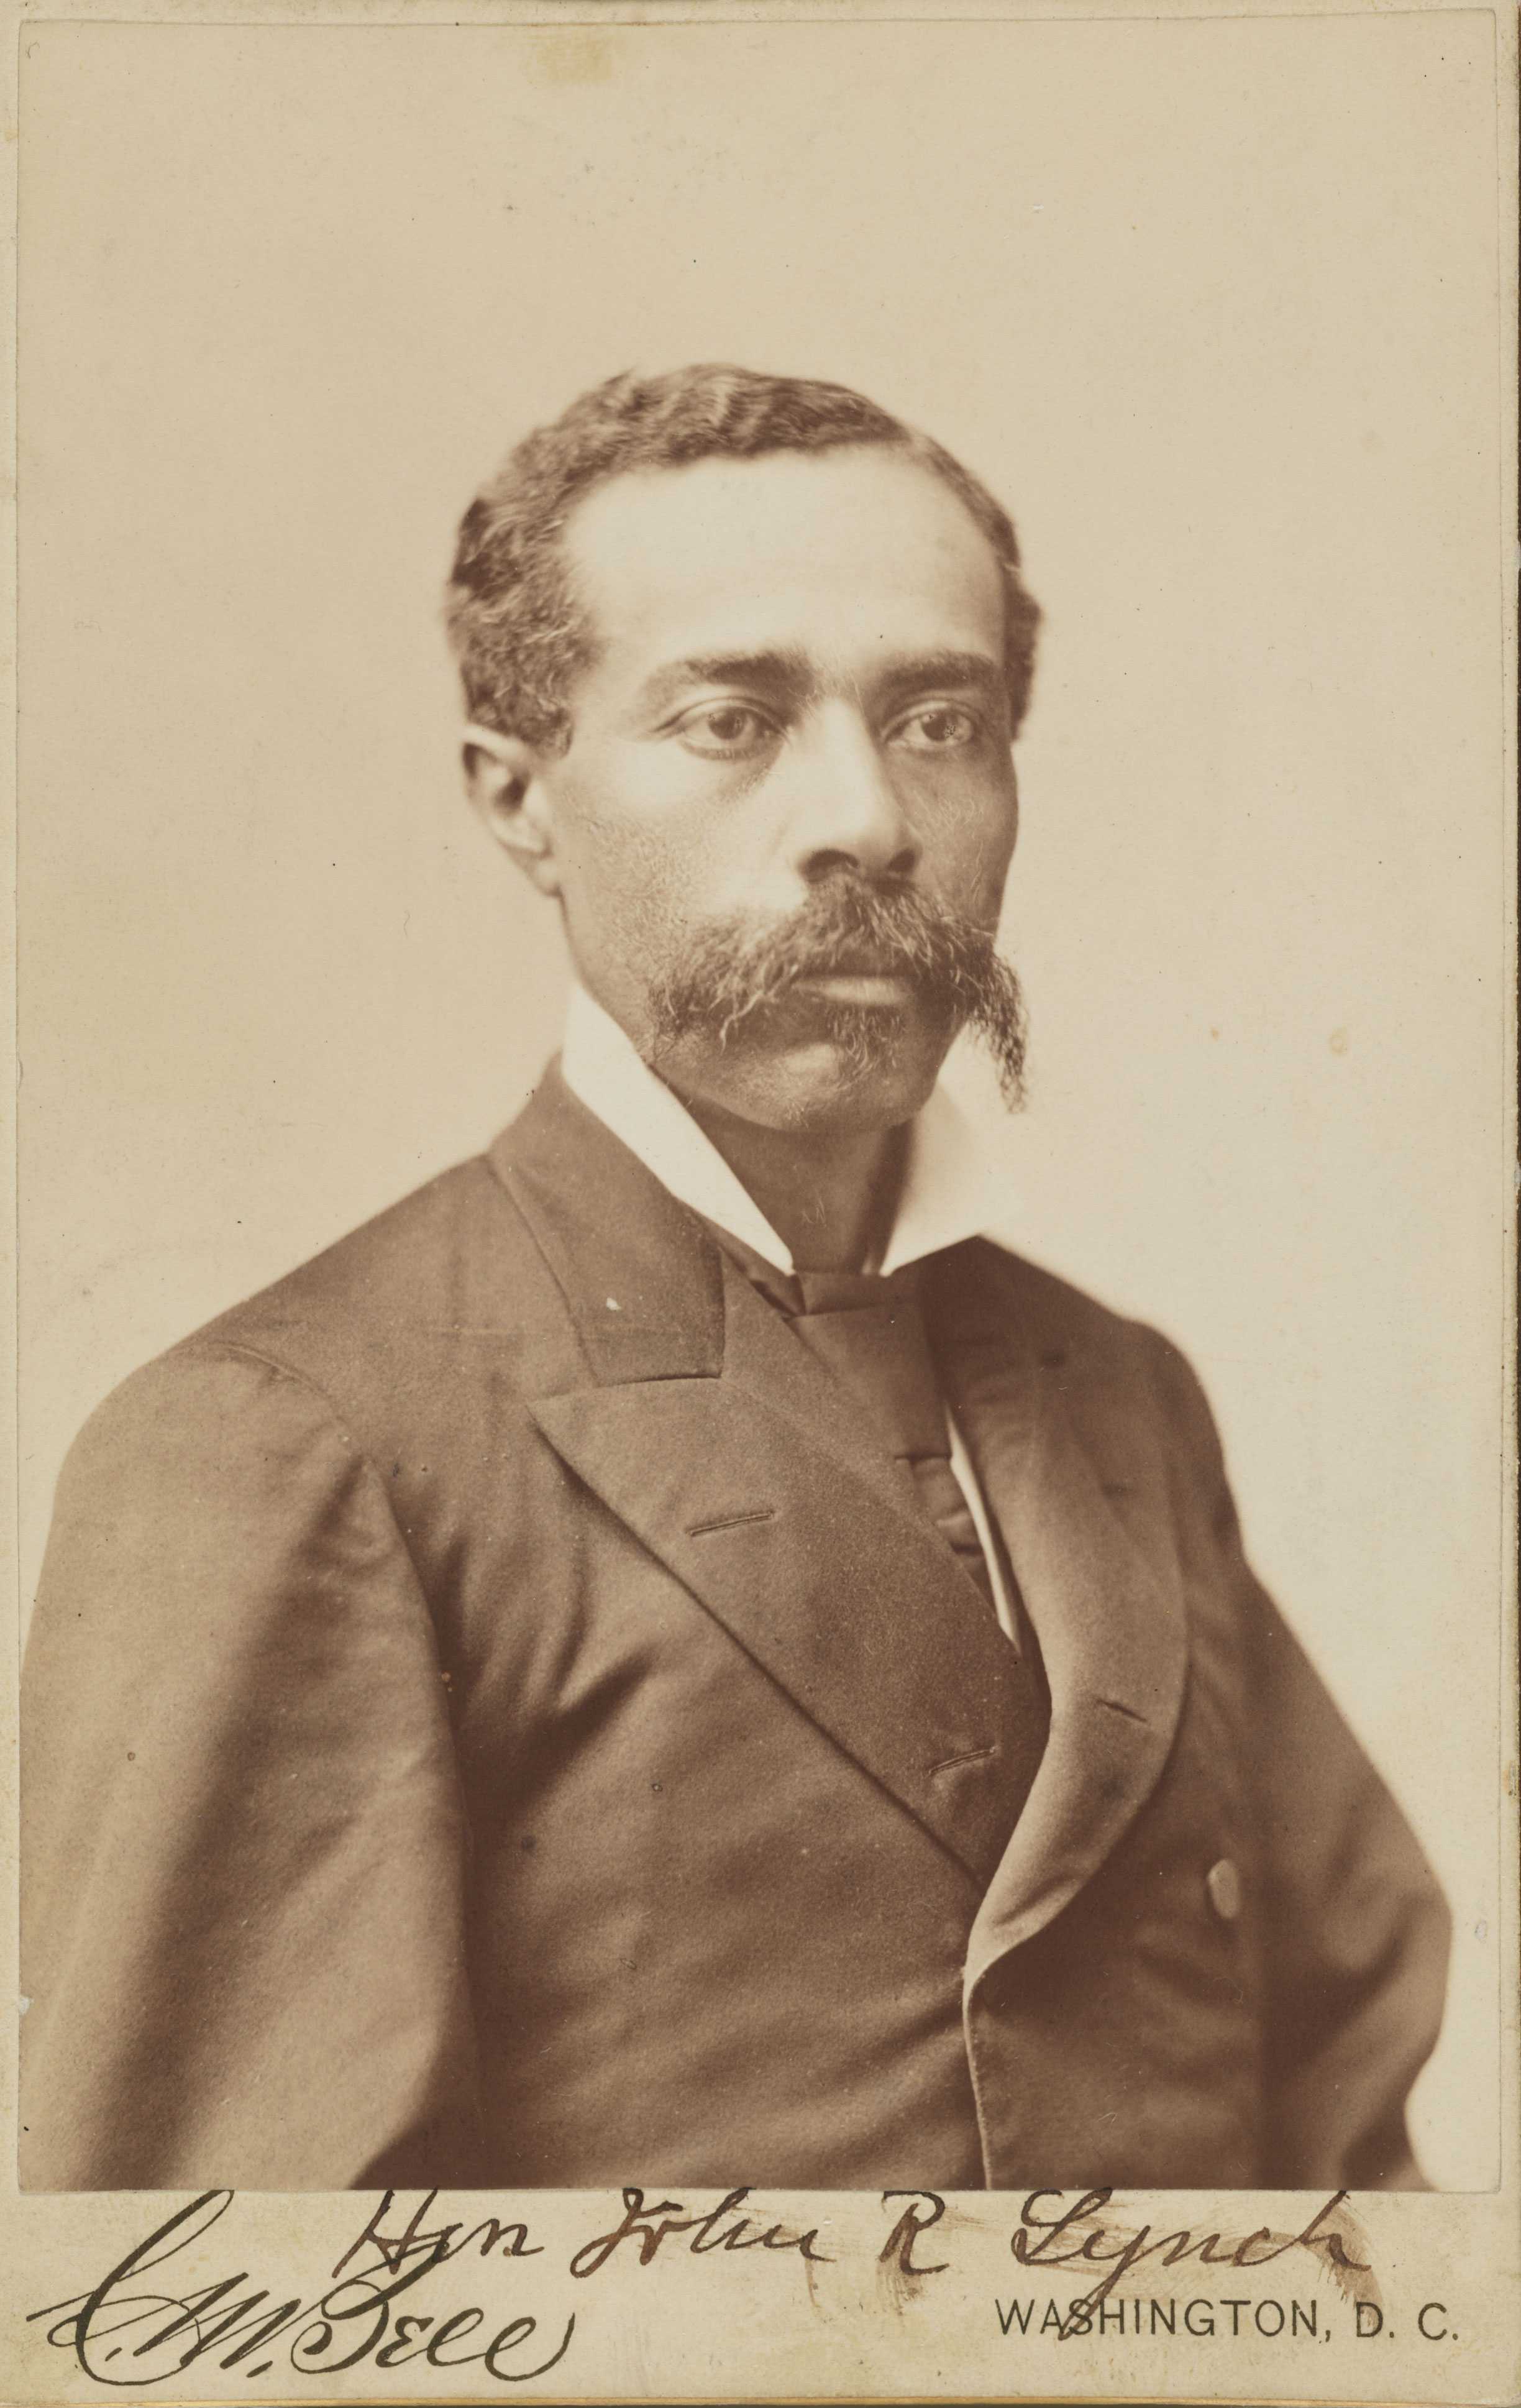 Sepia toned, half length portrait of African American man with large hand bar mustache.  Below the image "Hon John R Lynch" is handwritten and "Washington, D.C." is printed.  The image is also signed by the photographer "C. M. Bell"